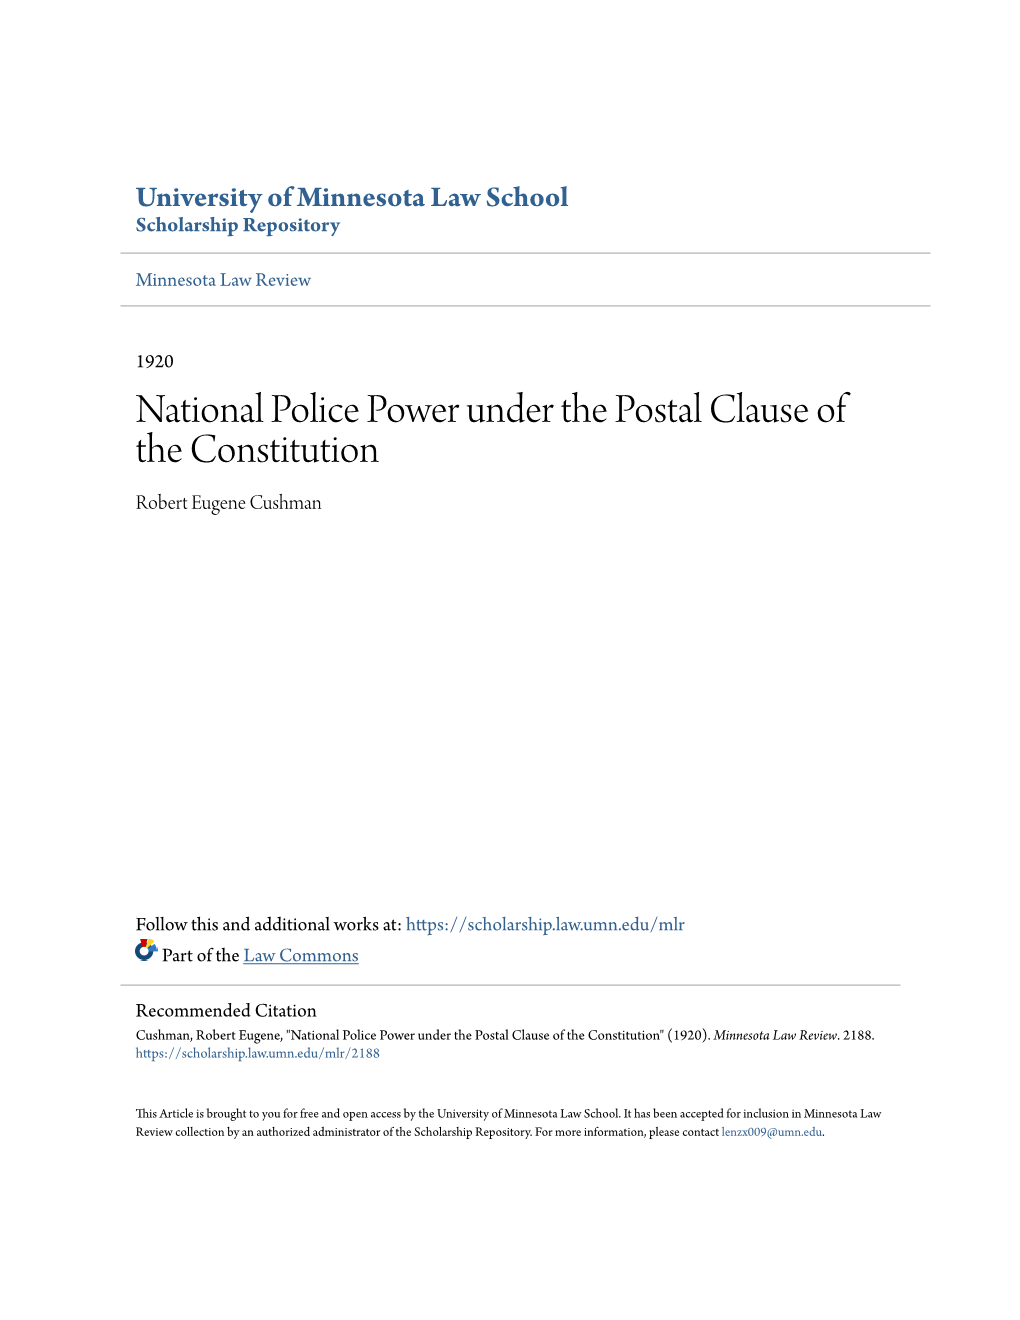 National Police Power Under the Postal Clause of the Constitution Robert Eugene Cushman